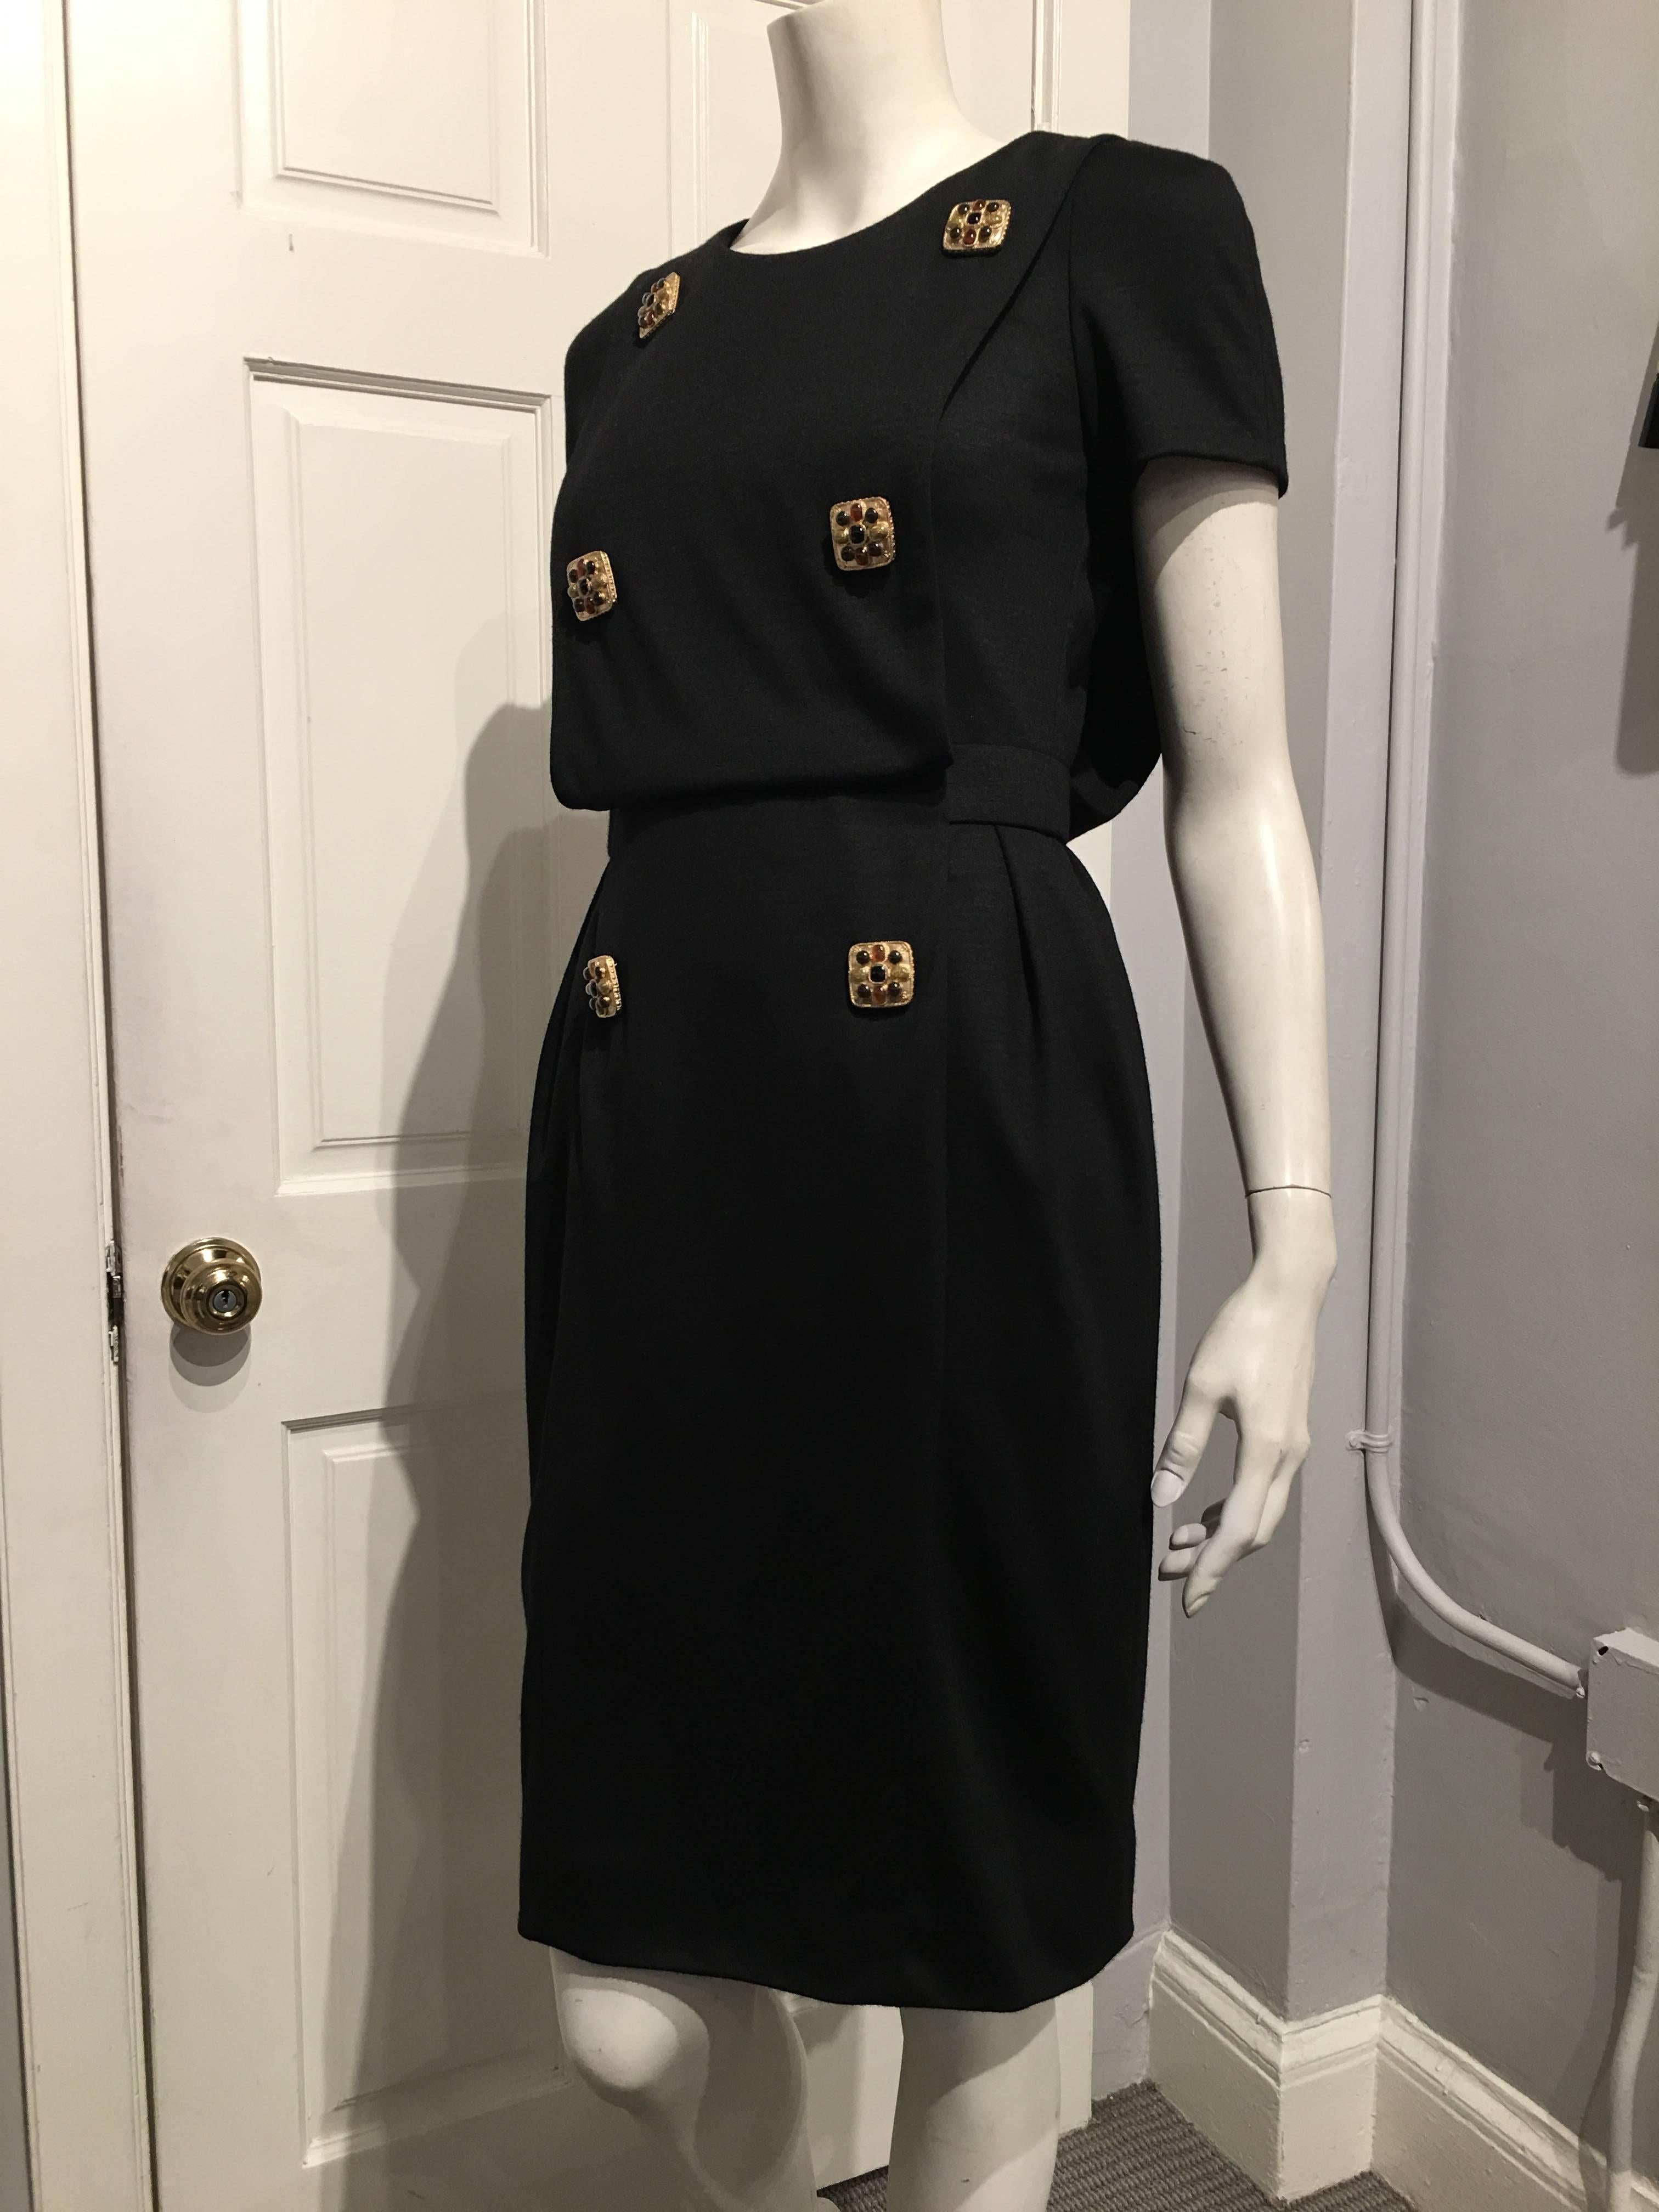 Chanel black wool dress with front and back paneling. The dress has a pocket that opens at either side and features six gripoix buttons in rust, grey, gold and black set on a gold metal backing down the front.

This piece is brand new with tags.